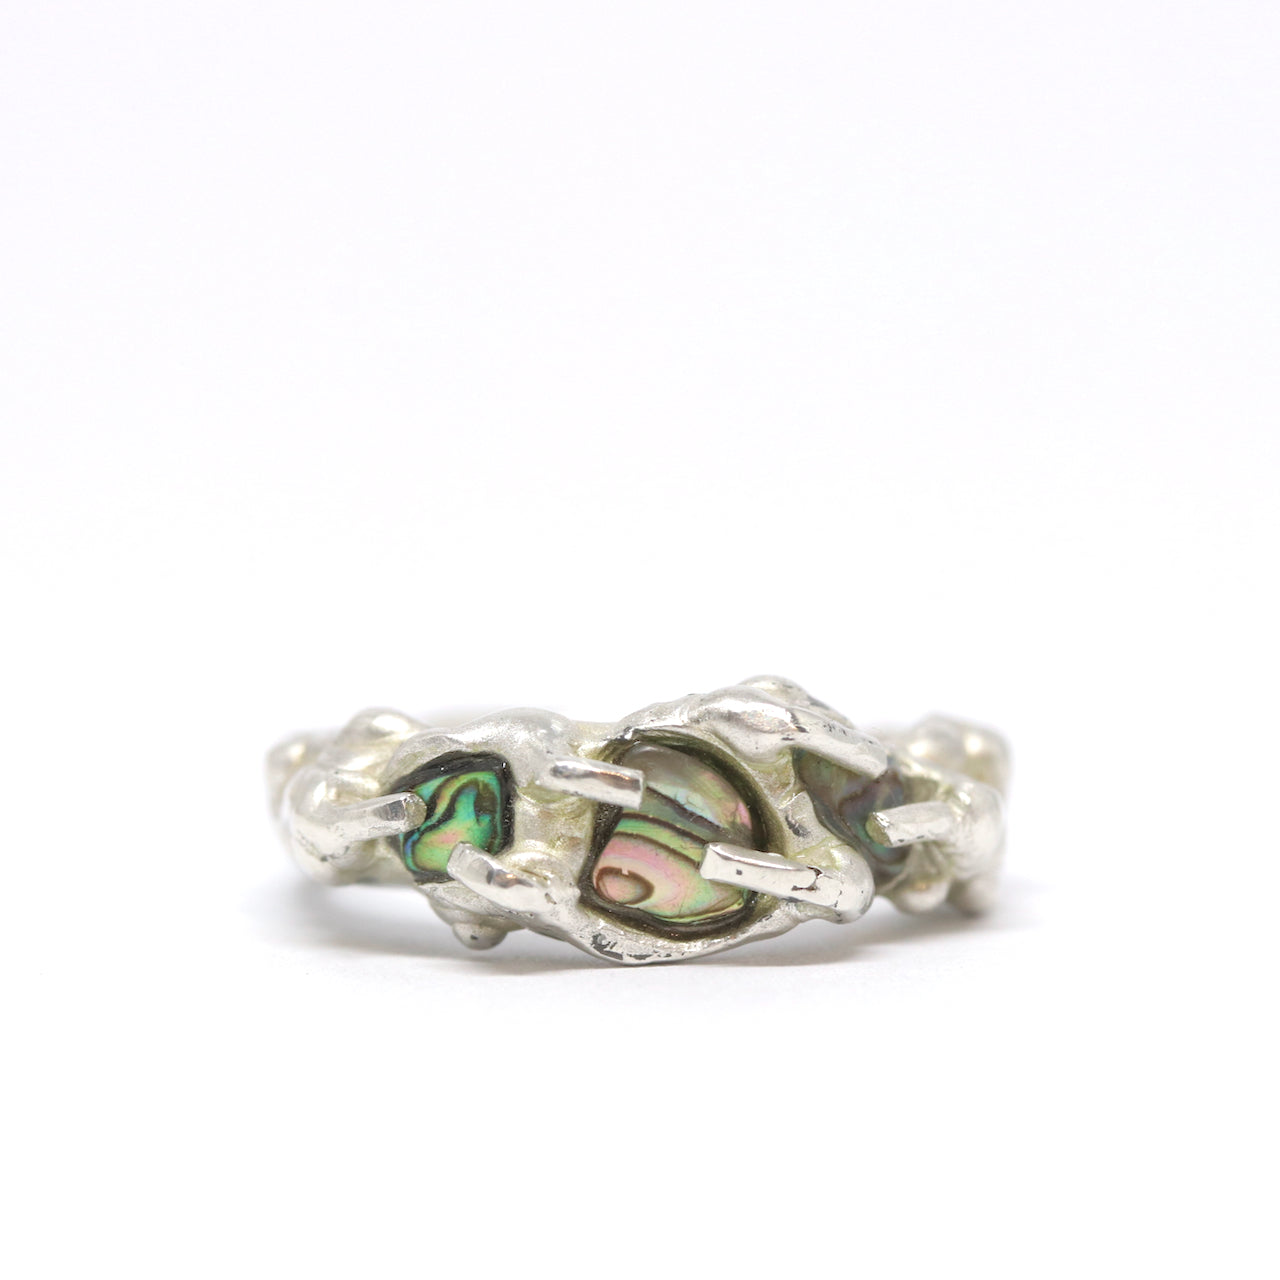 A sterling silver and paua shell ring. This ring was hand made in Wānaka, New Zealand by designer and jeweller Briar Hardy-Hesson.